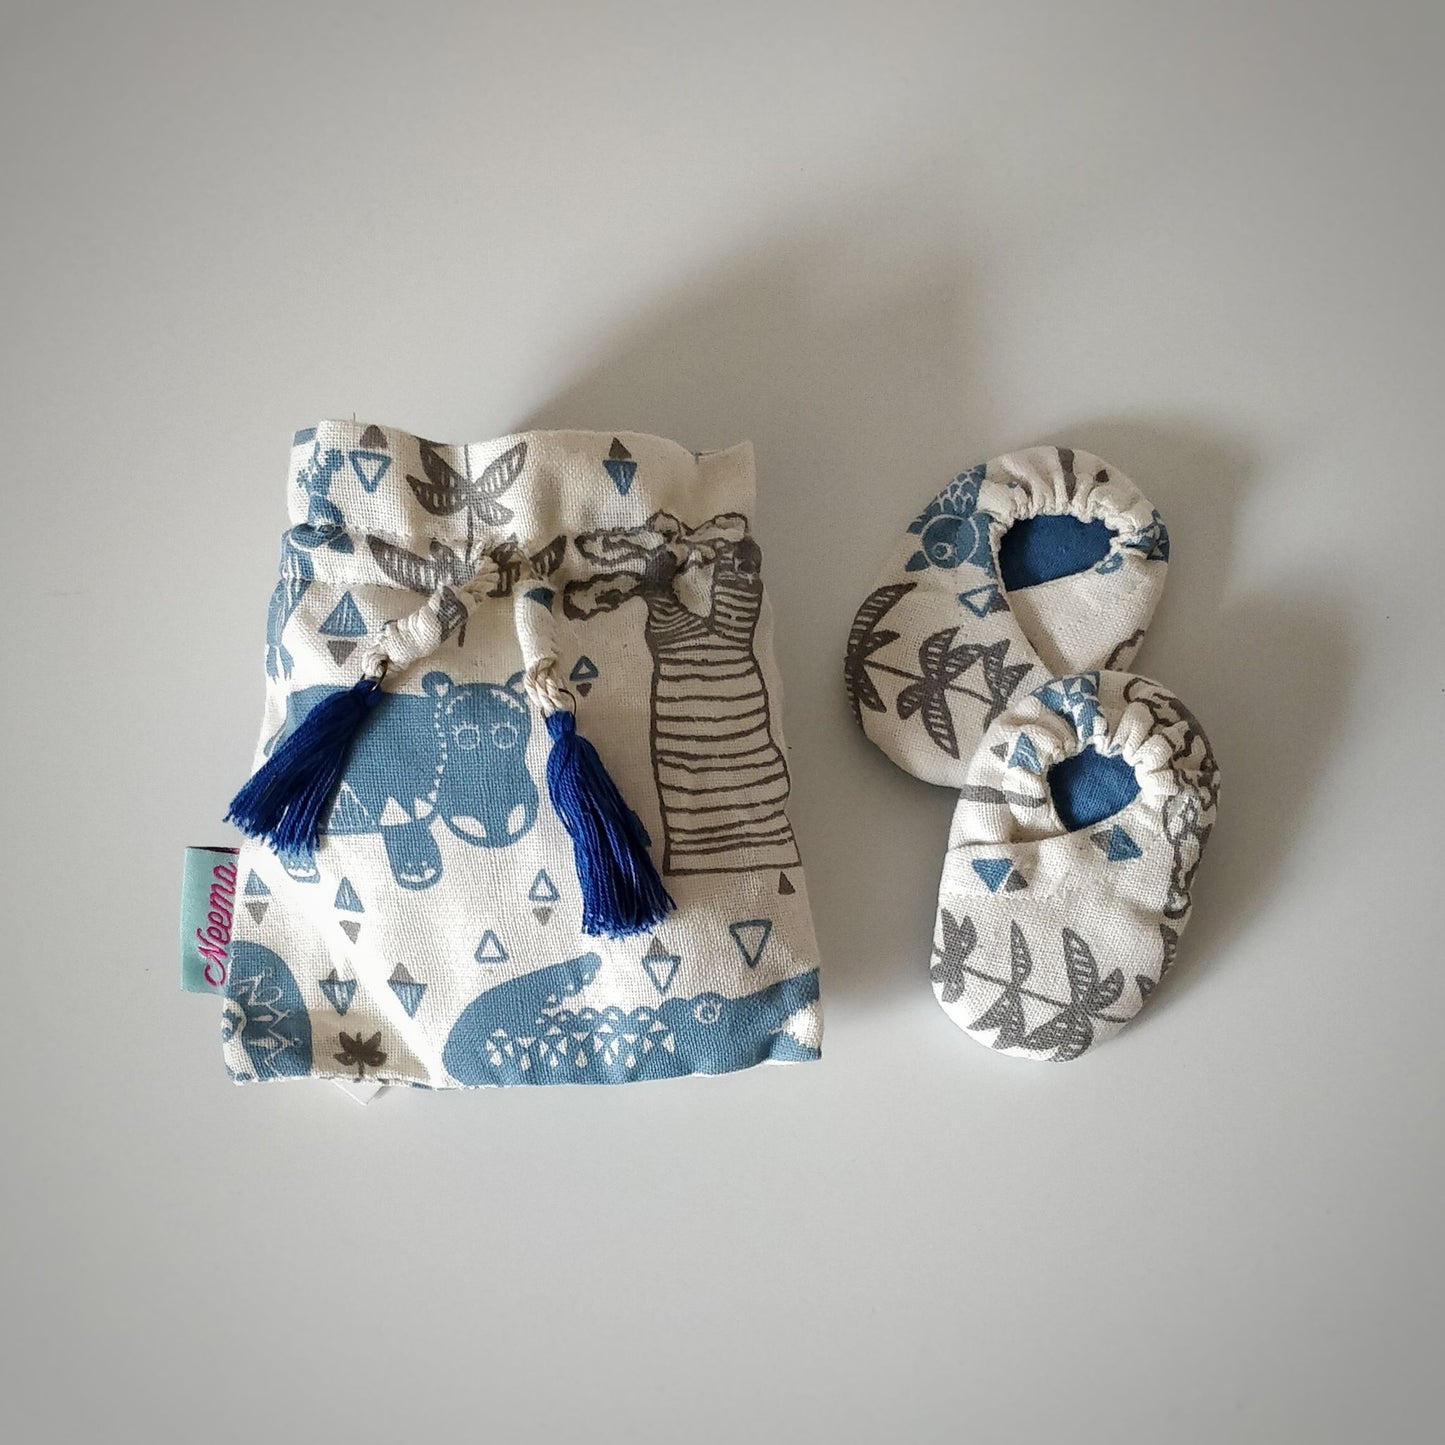 Handmade and Fair Trade Cotton Baby Shoes - blue with bag